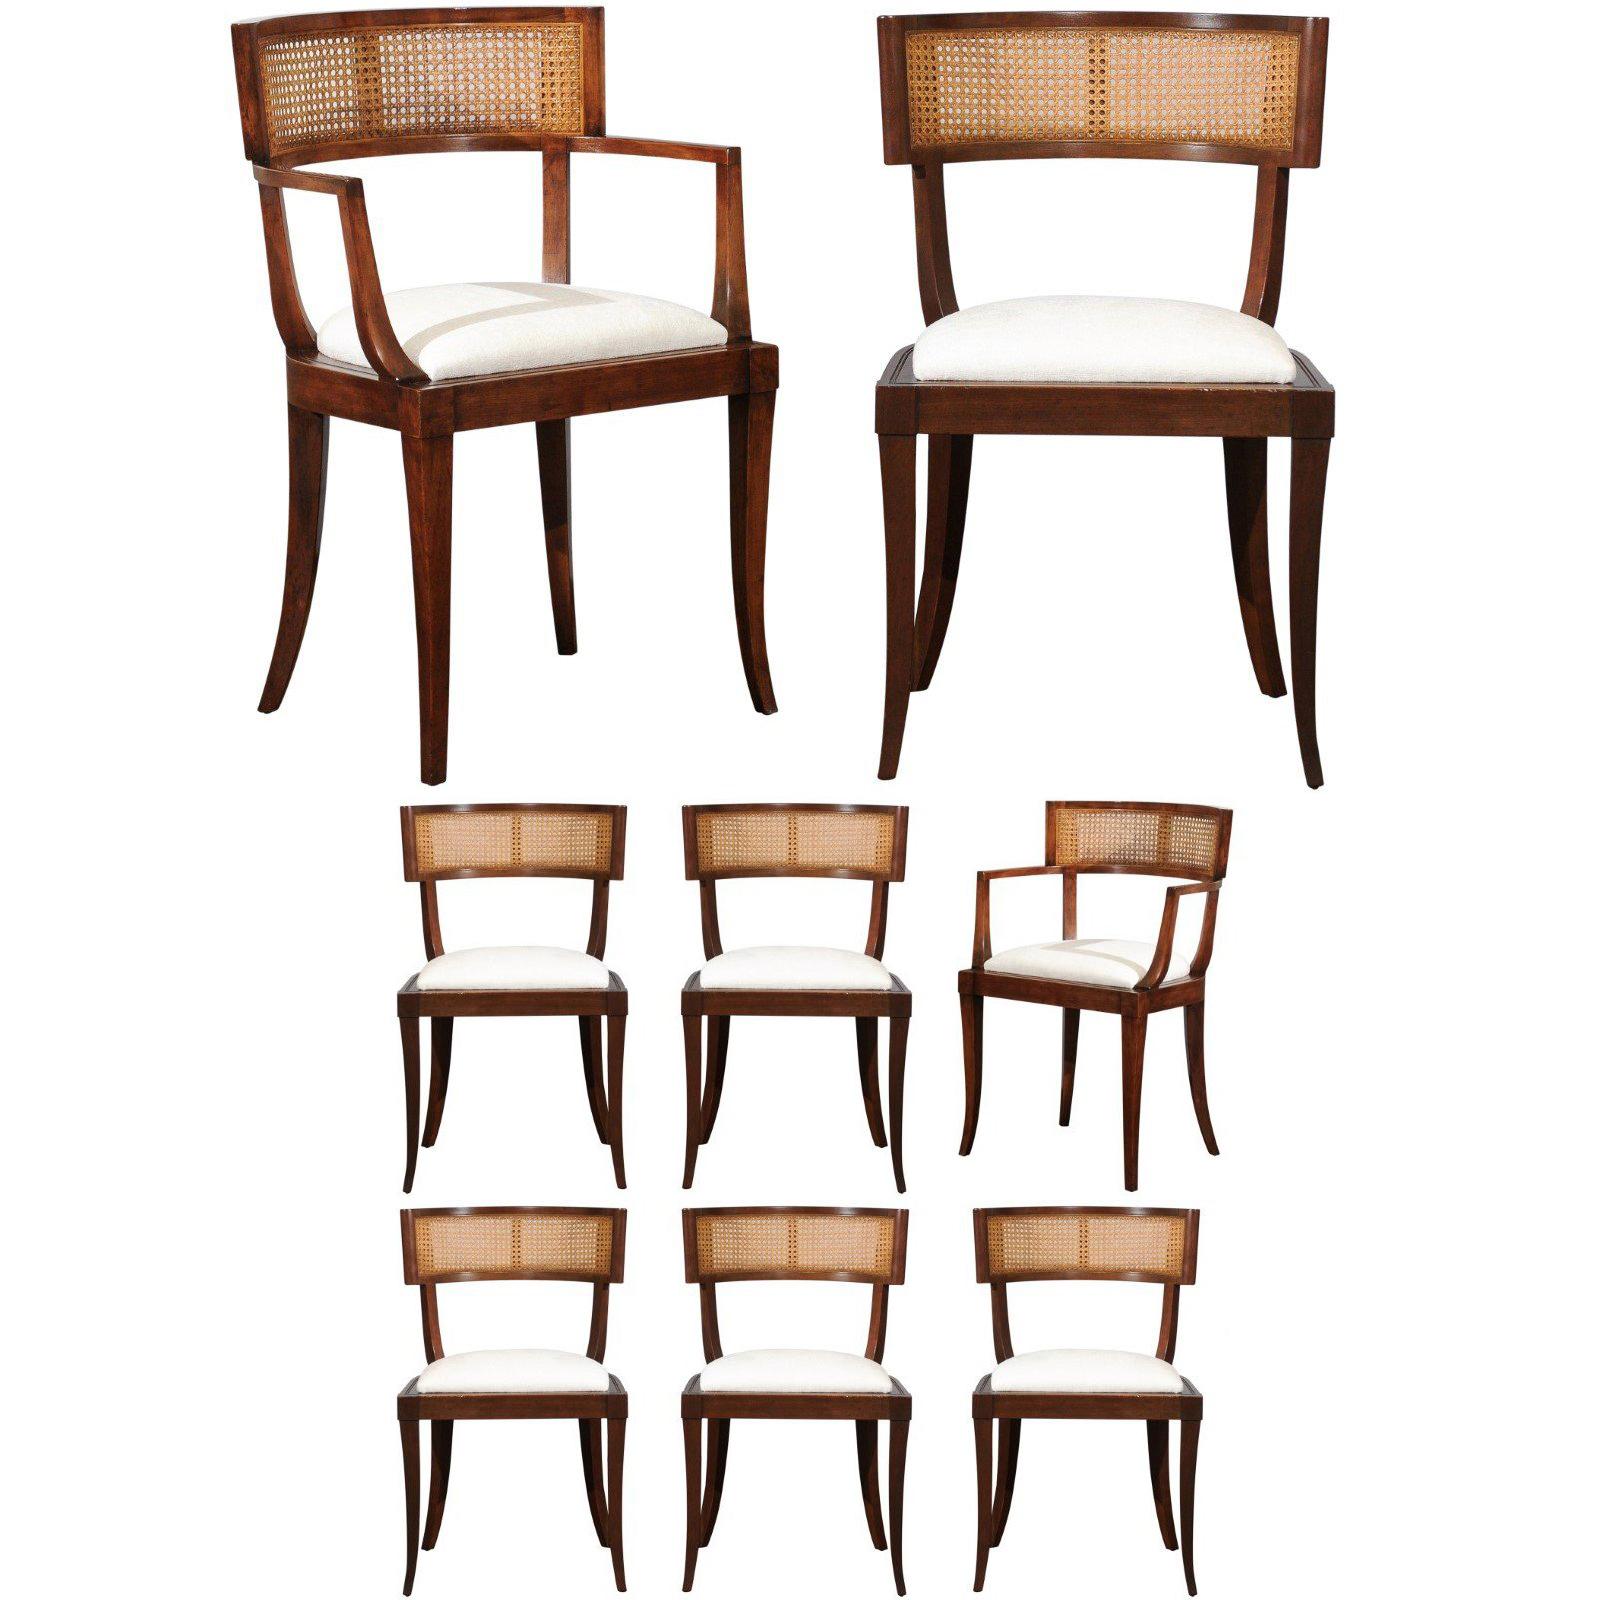 Exquisite Set of Ten Klismos Cane Dining Chairs by Baker, circa 1958